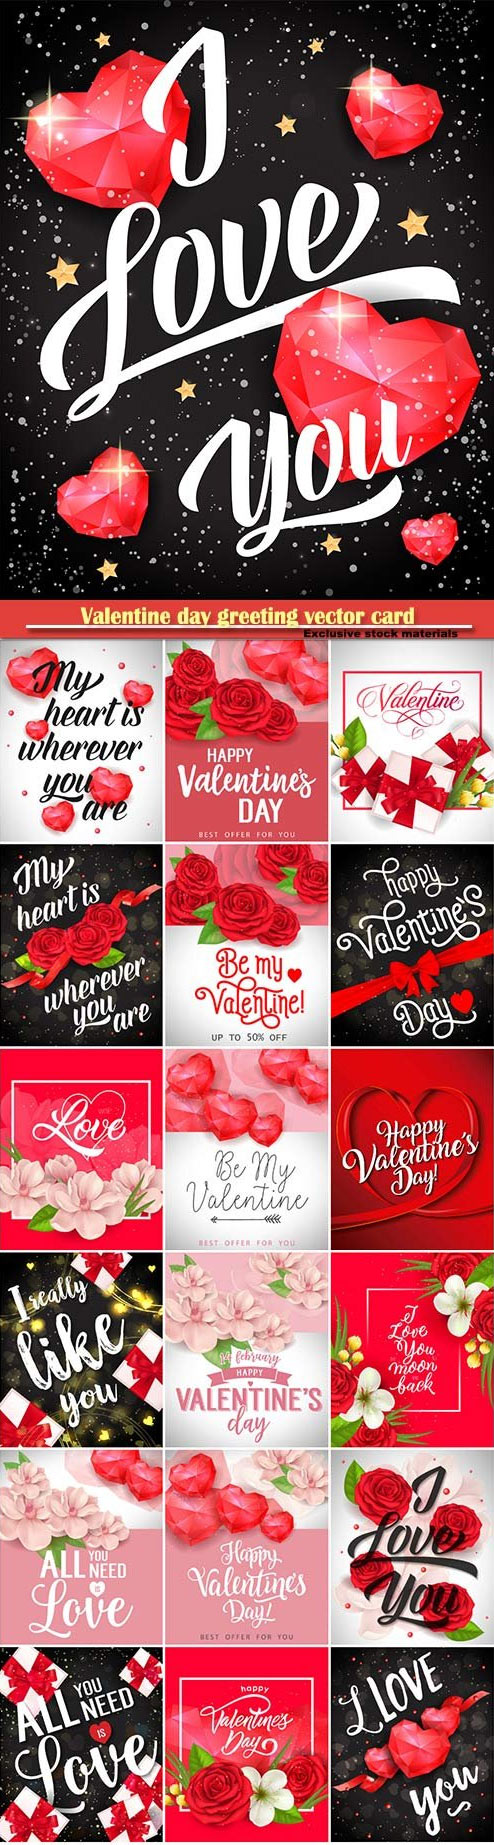 Valentine Day Greeting Vector Card Vol 4